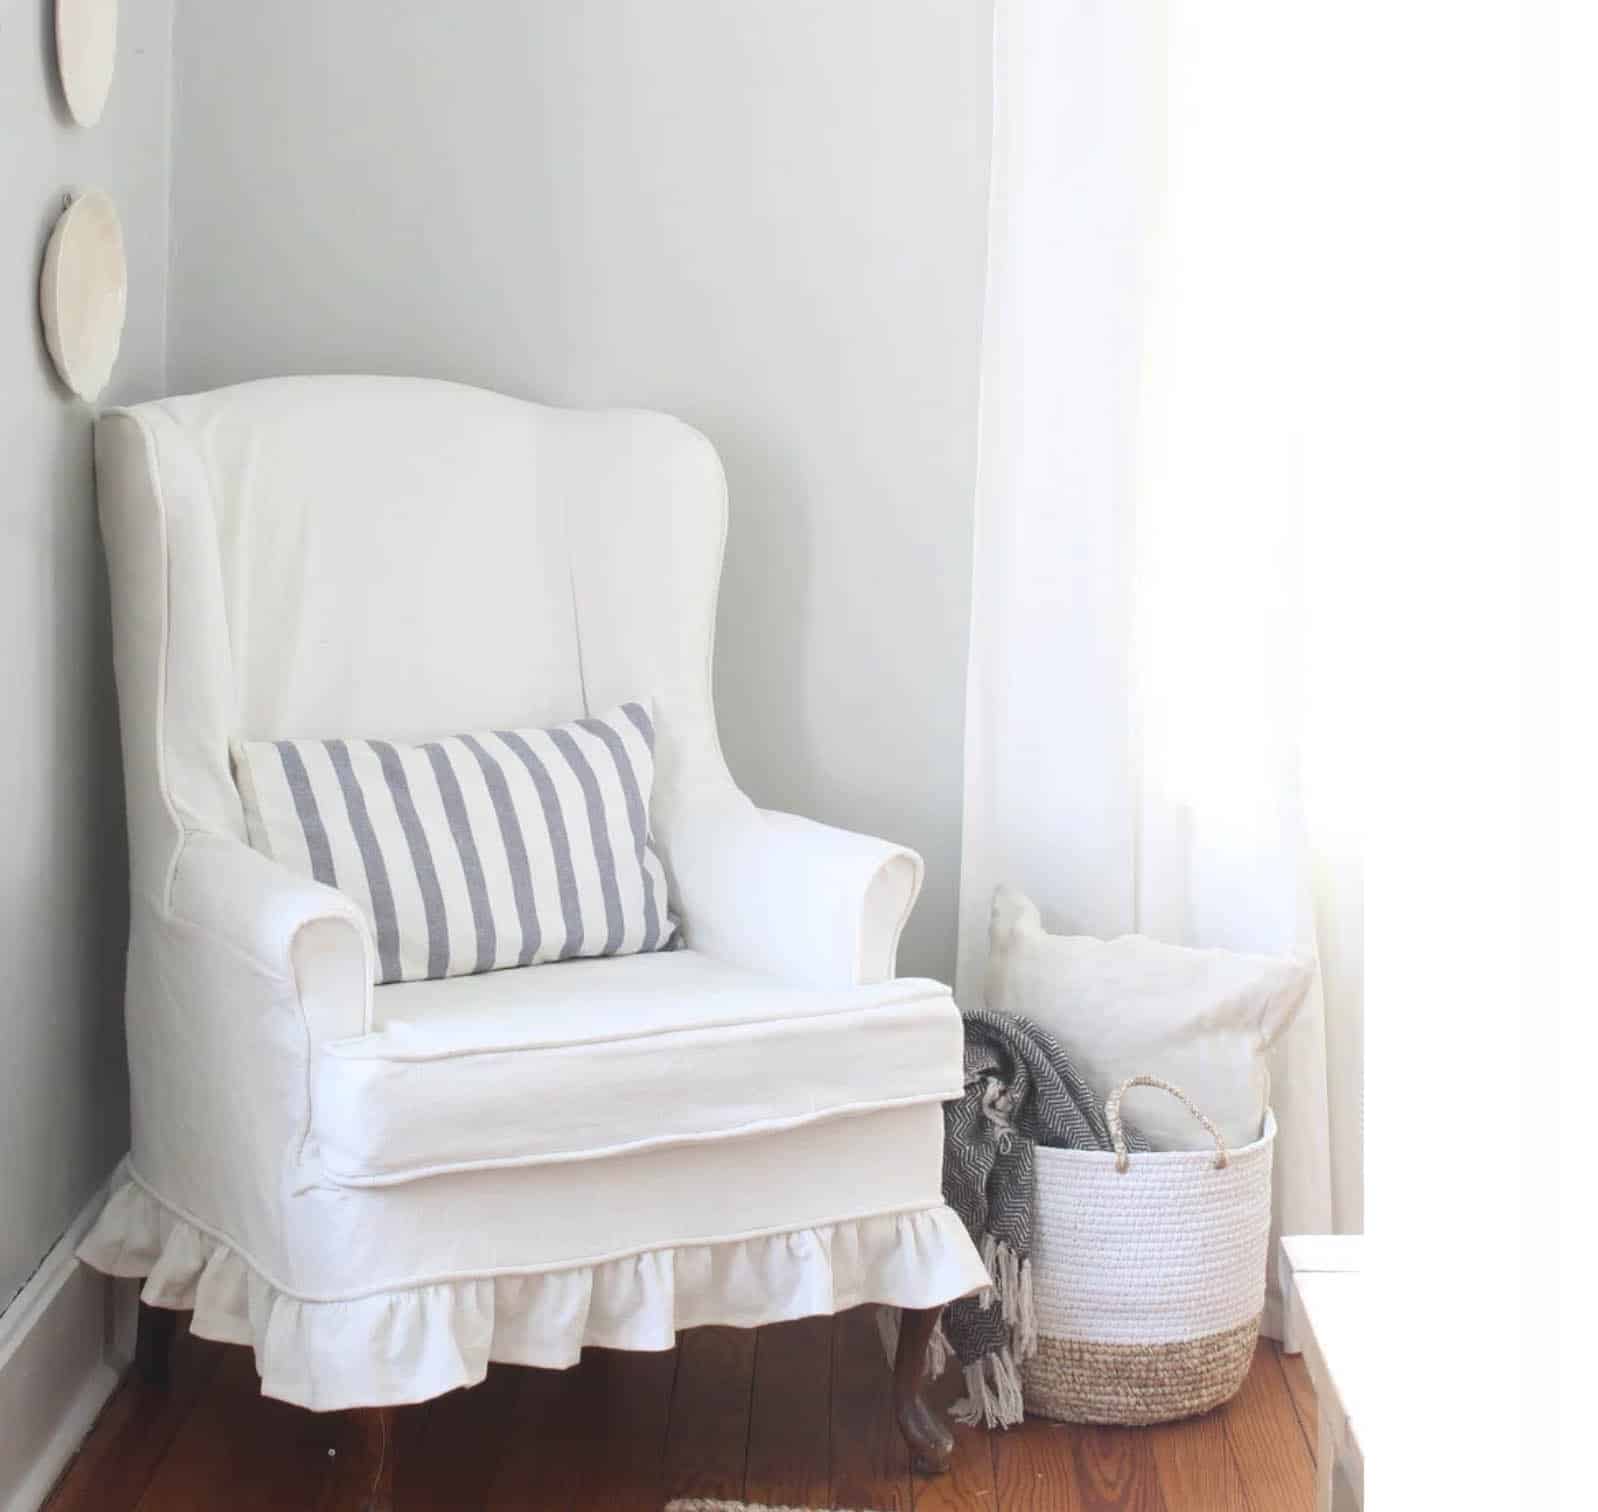 DIY Projects to Make with Drop Cloth - Farmhouse on Boone